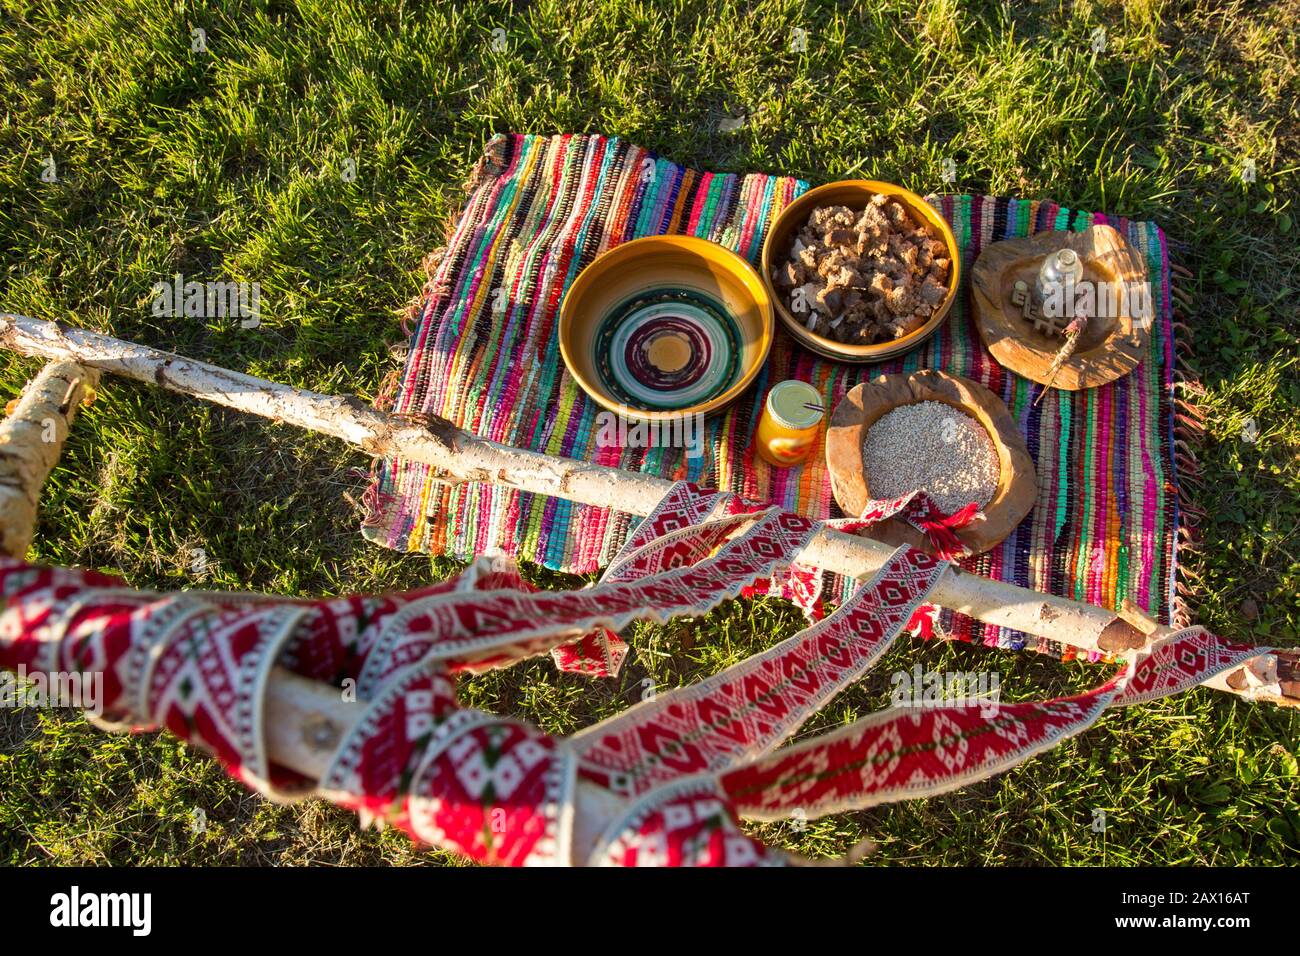 Preparation of traditional latvian ritual of celebrating summer solstice. Stock Photo